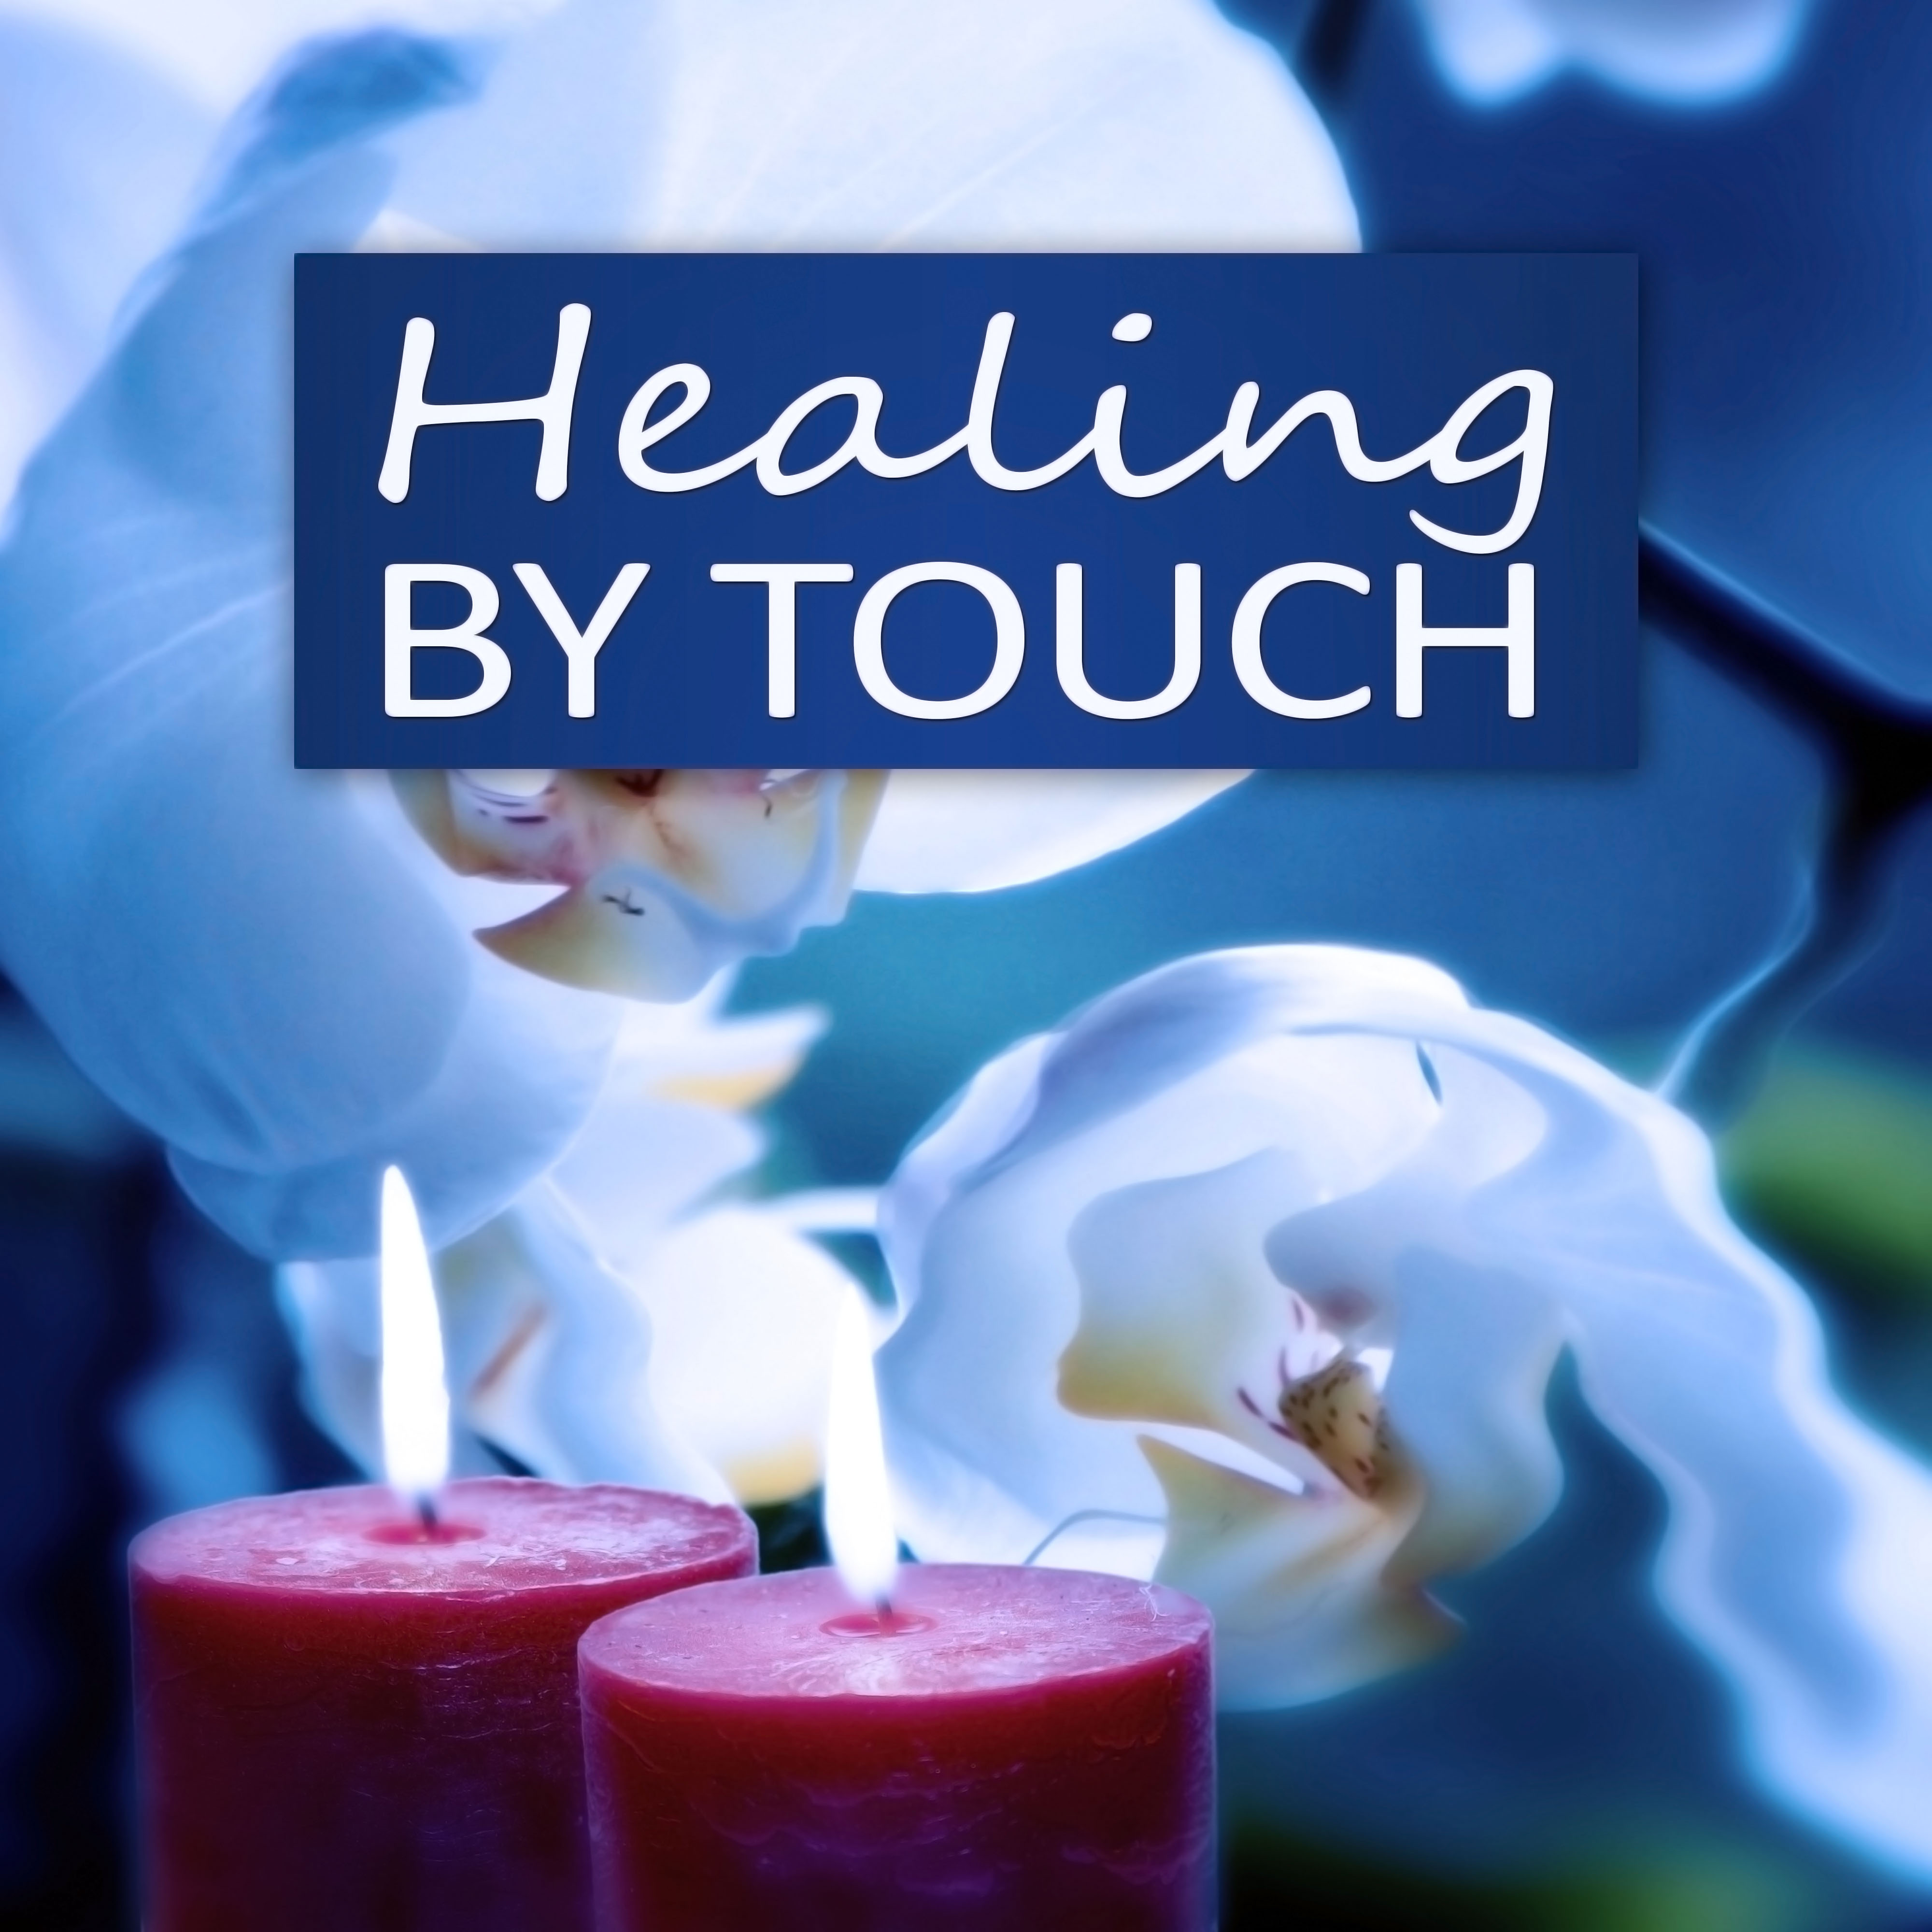 Healing by Touch - Nature Sounds for Relaxation, Sensual Massage, Meditation, Spa & Wellness, Reiki Healing, Yoga